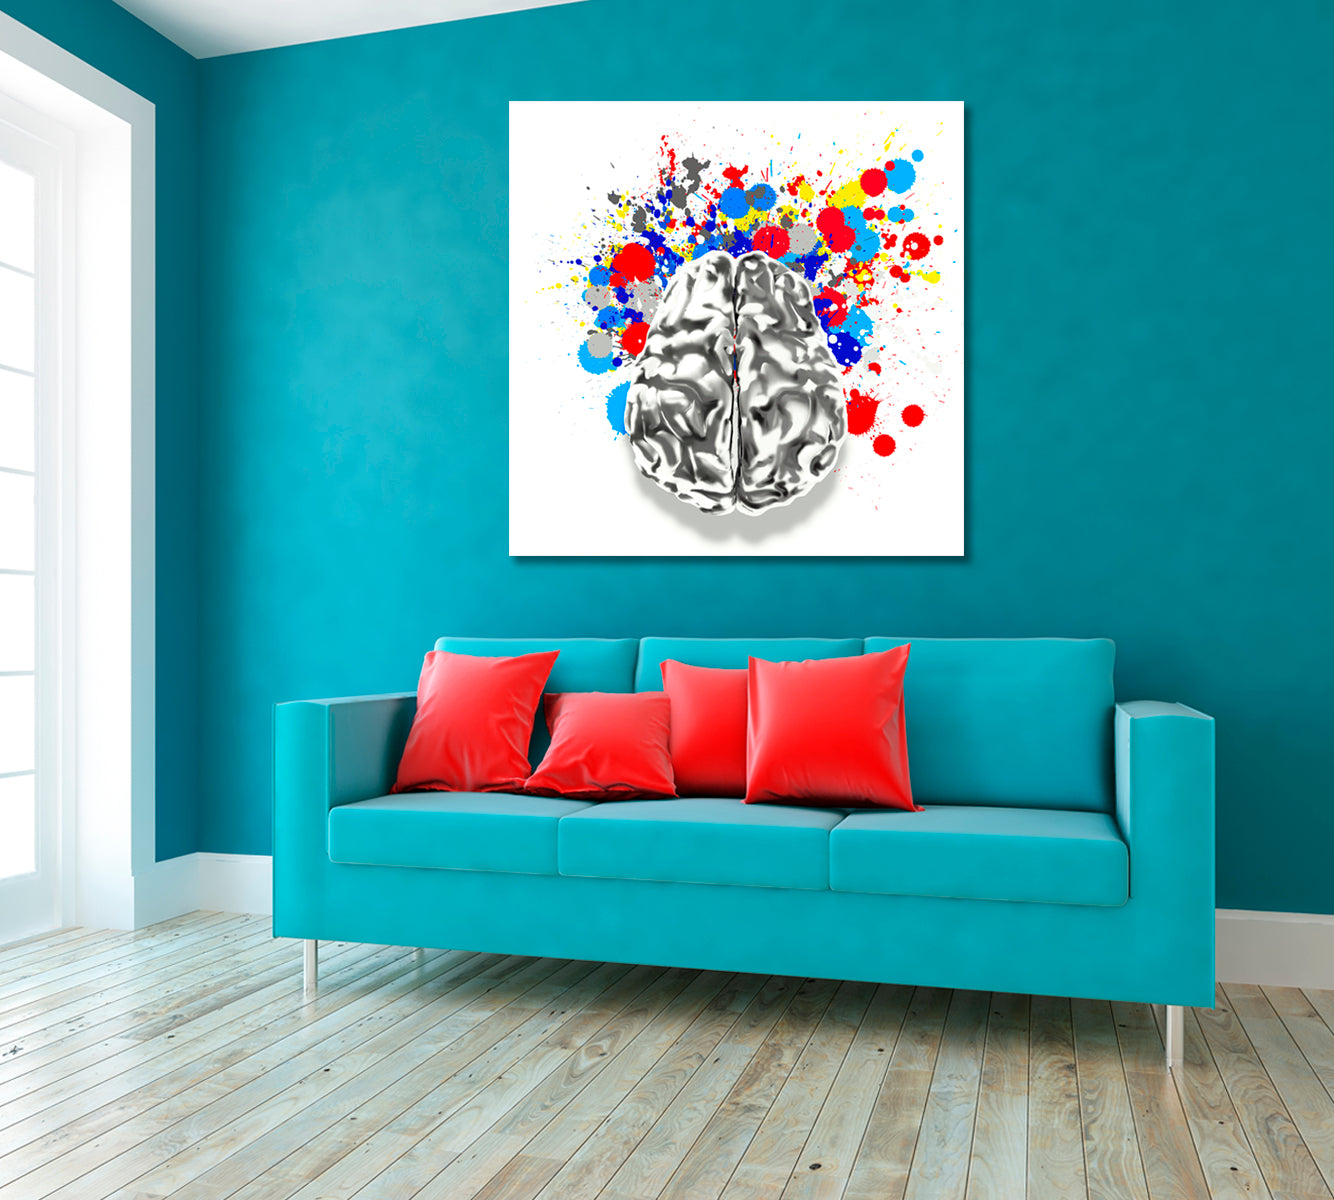 Human Brain with Colorful Splash Canvas Print ArtLexy 1 Panel 12"x12" inches 